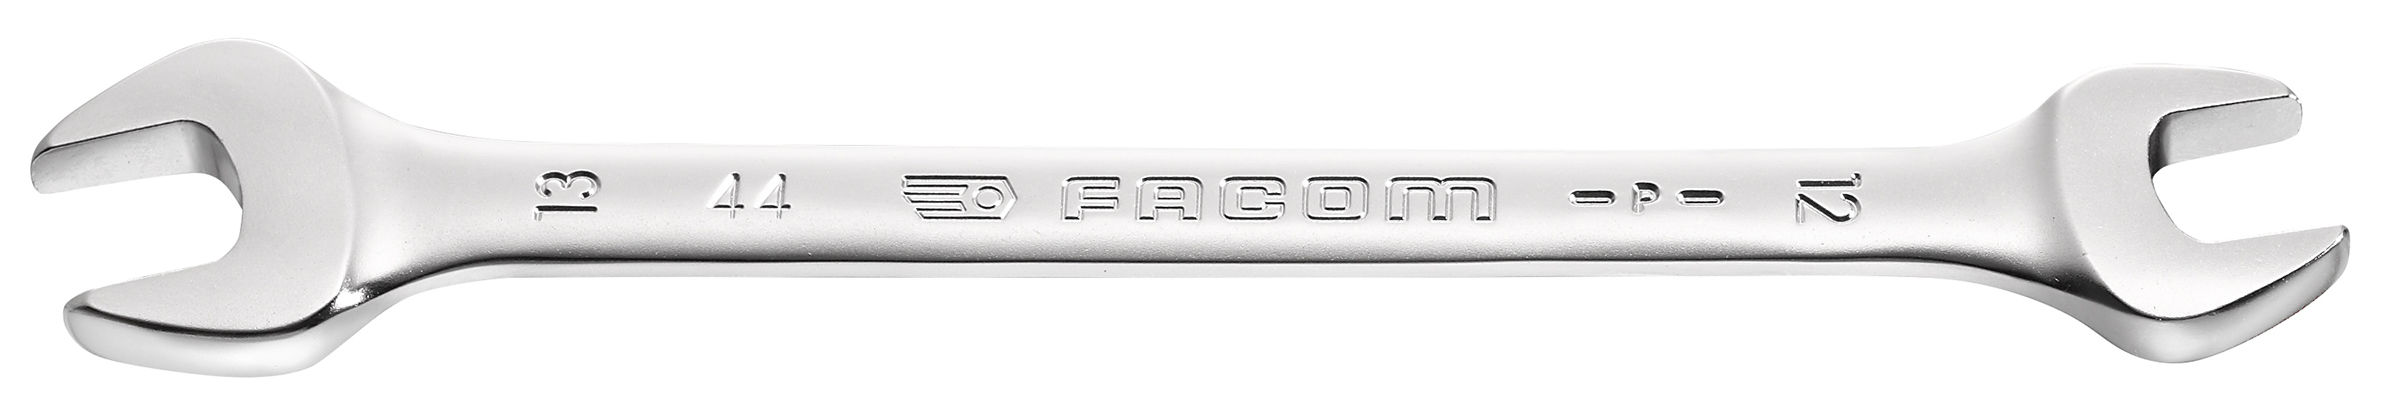 Facom 8mm x 10mm Metric Series 44 Open End Ended Spanner Spanners Wrench 